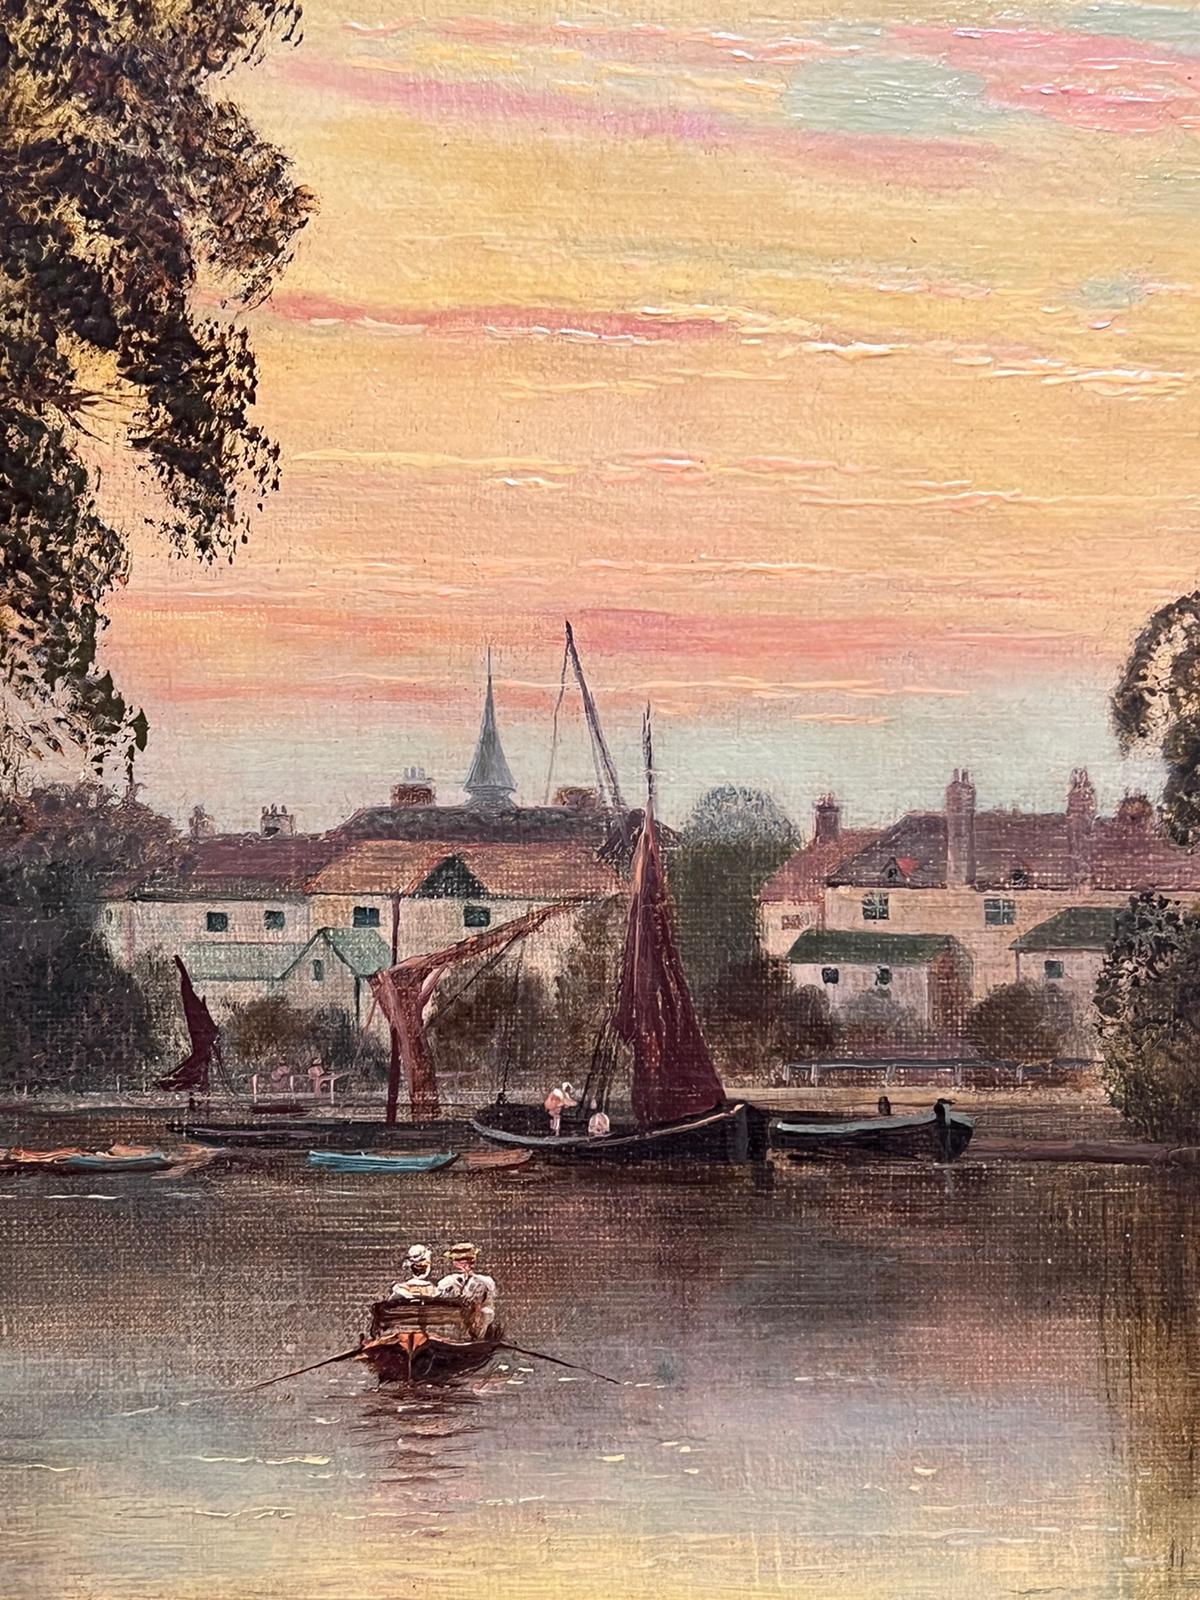 Windsor/ Eton on the River Thames Sunset Antique Signed English Oil Painting For Sale 3